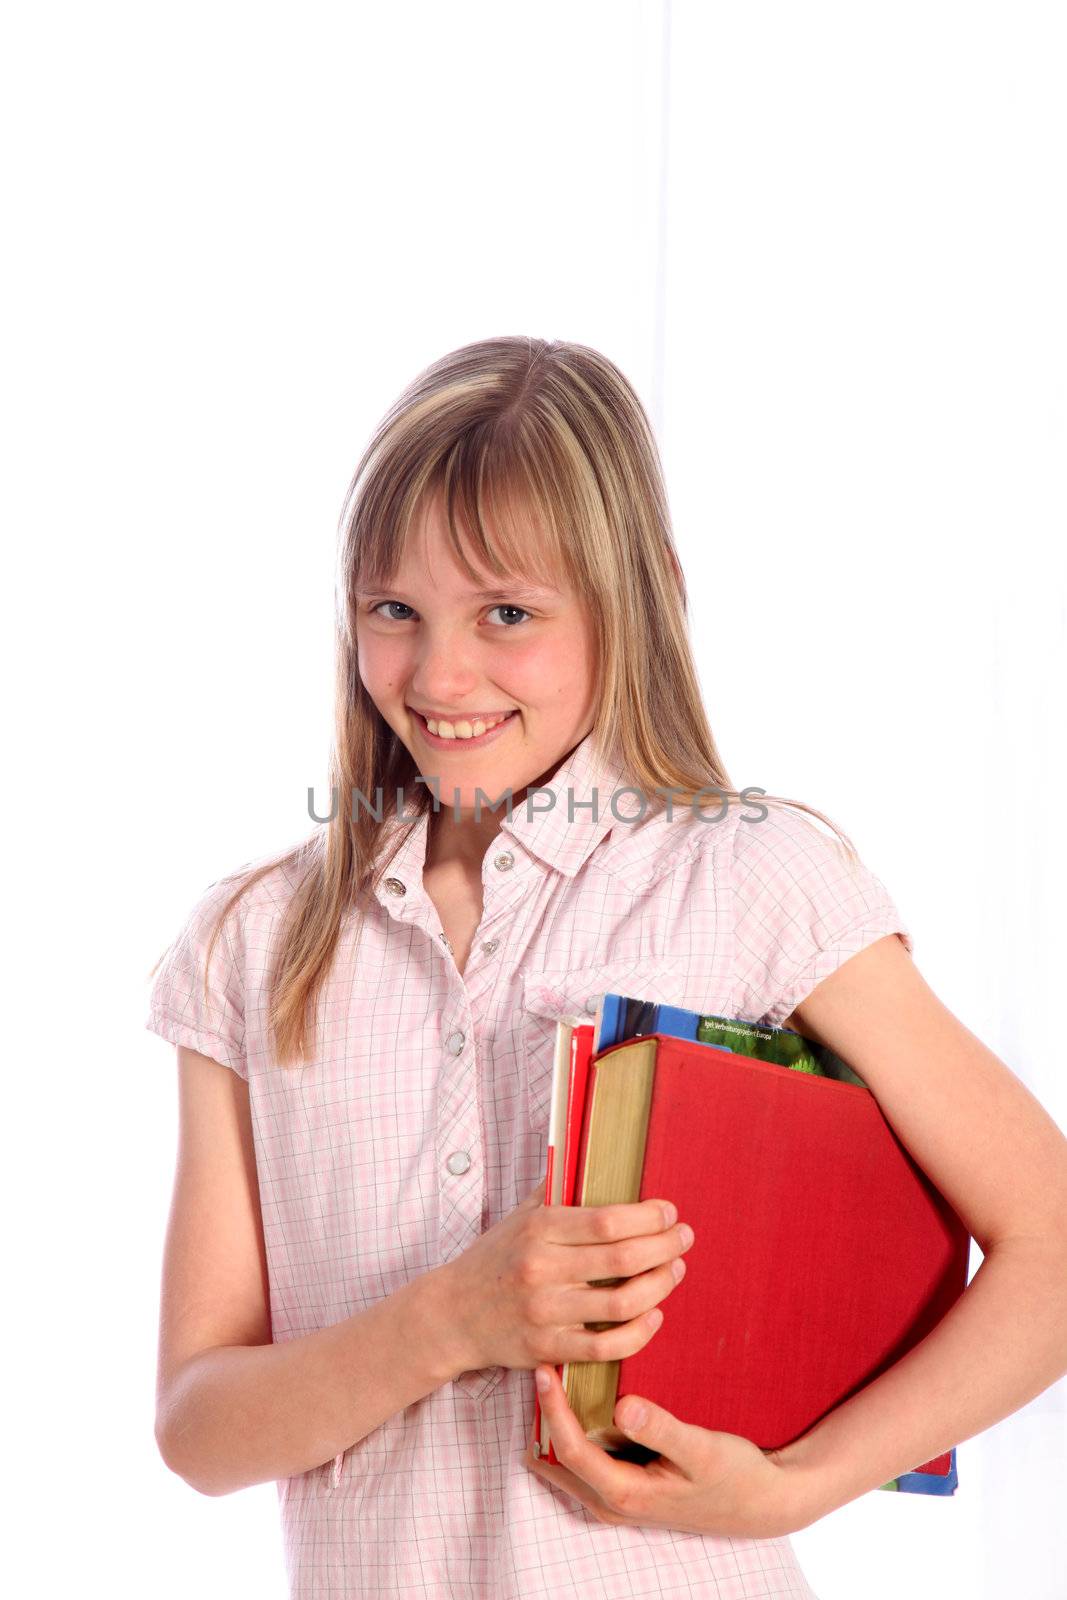 Blond, smiling girl with books under his arm by Farina6000